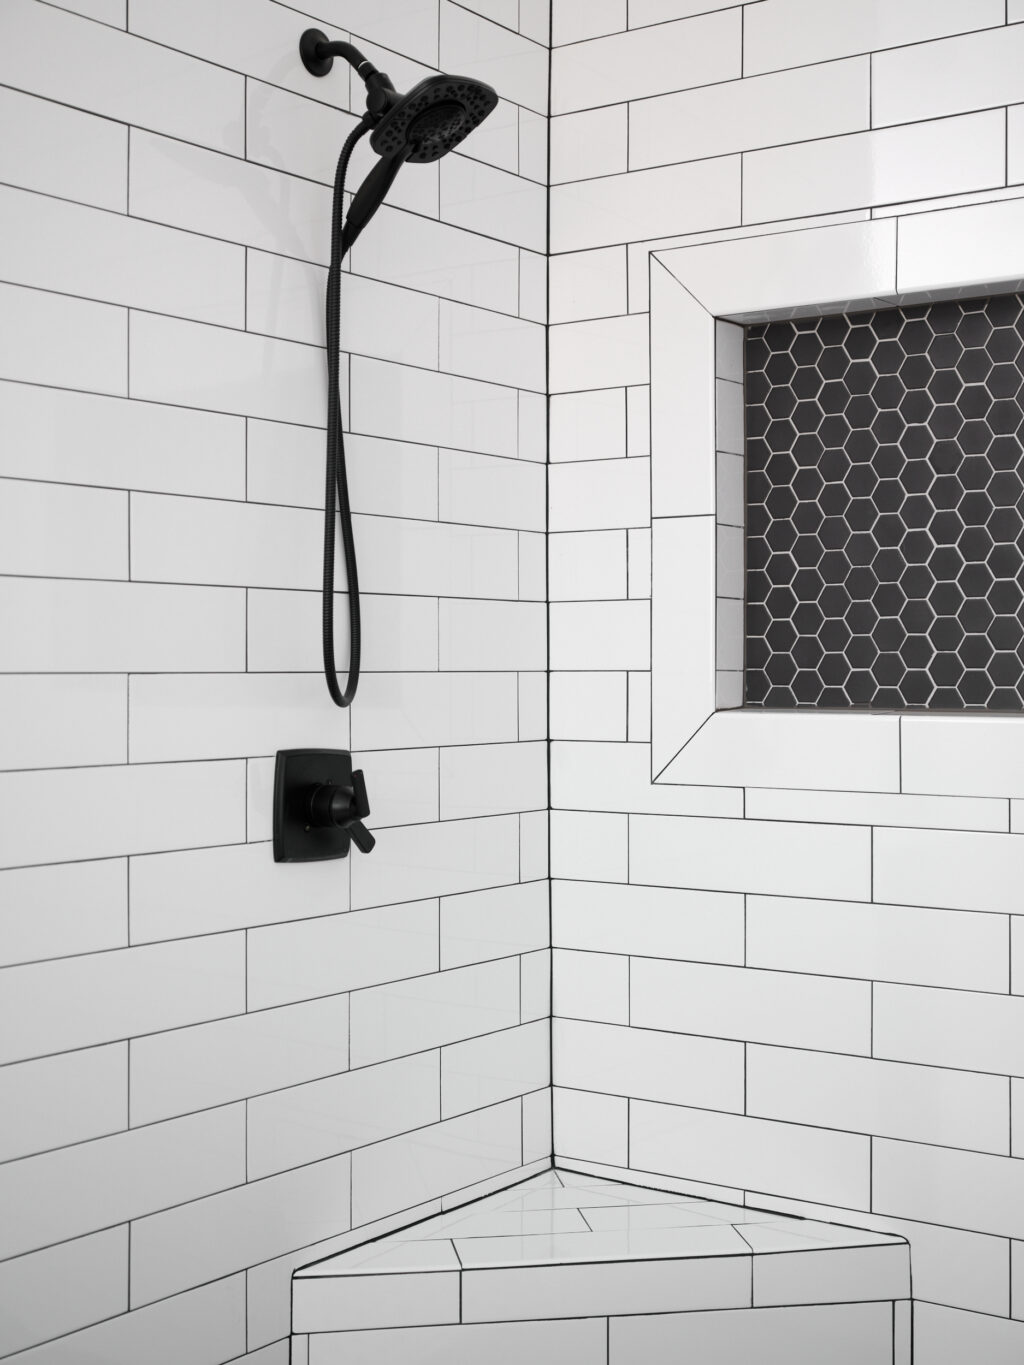 The luxury bathroom with black color shower and tap at Norman, OK